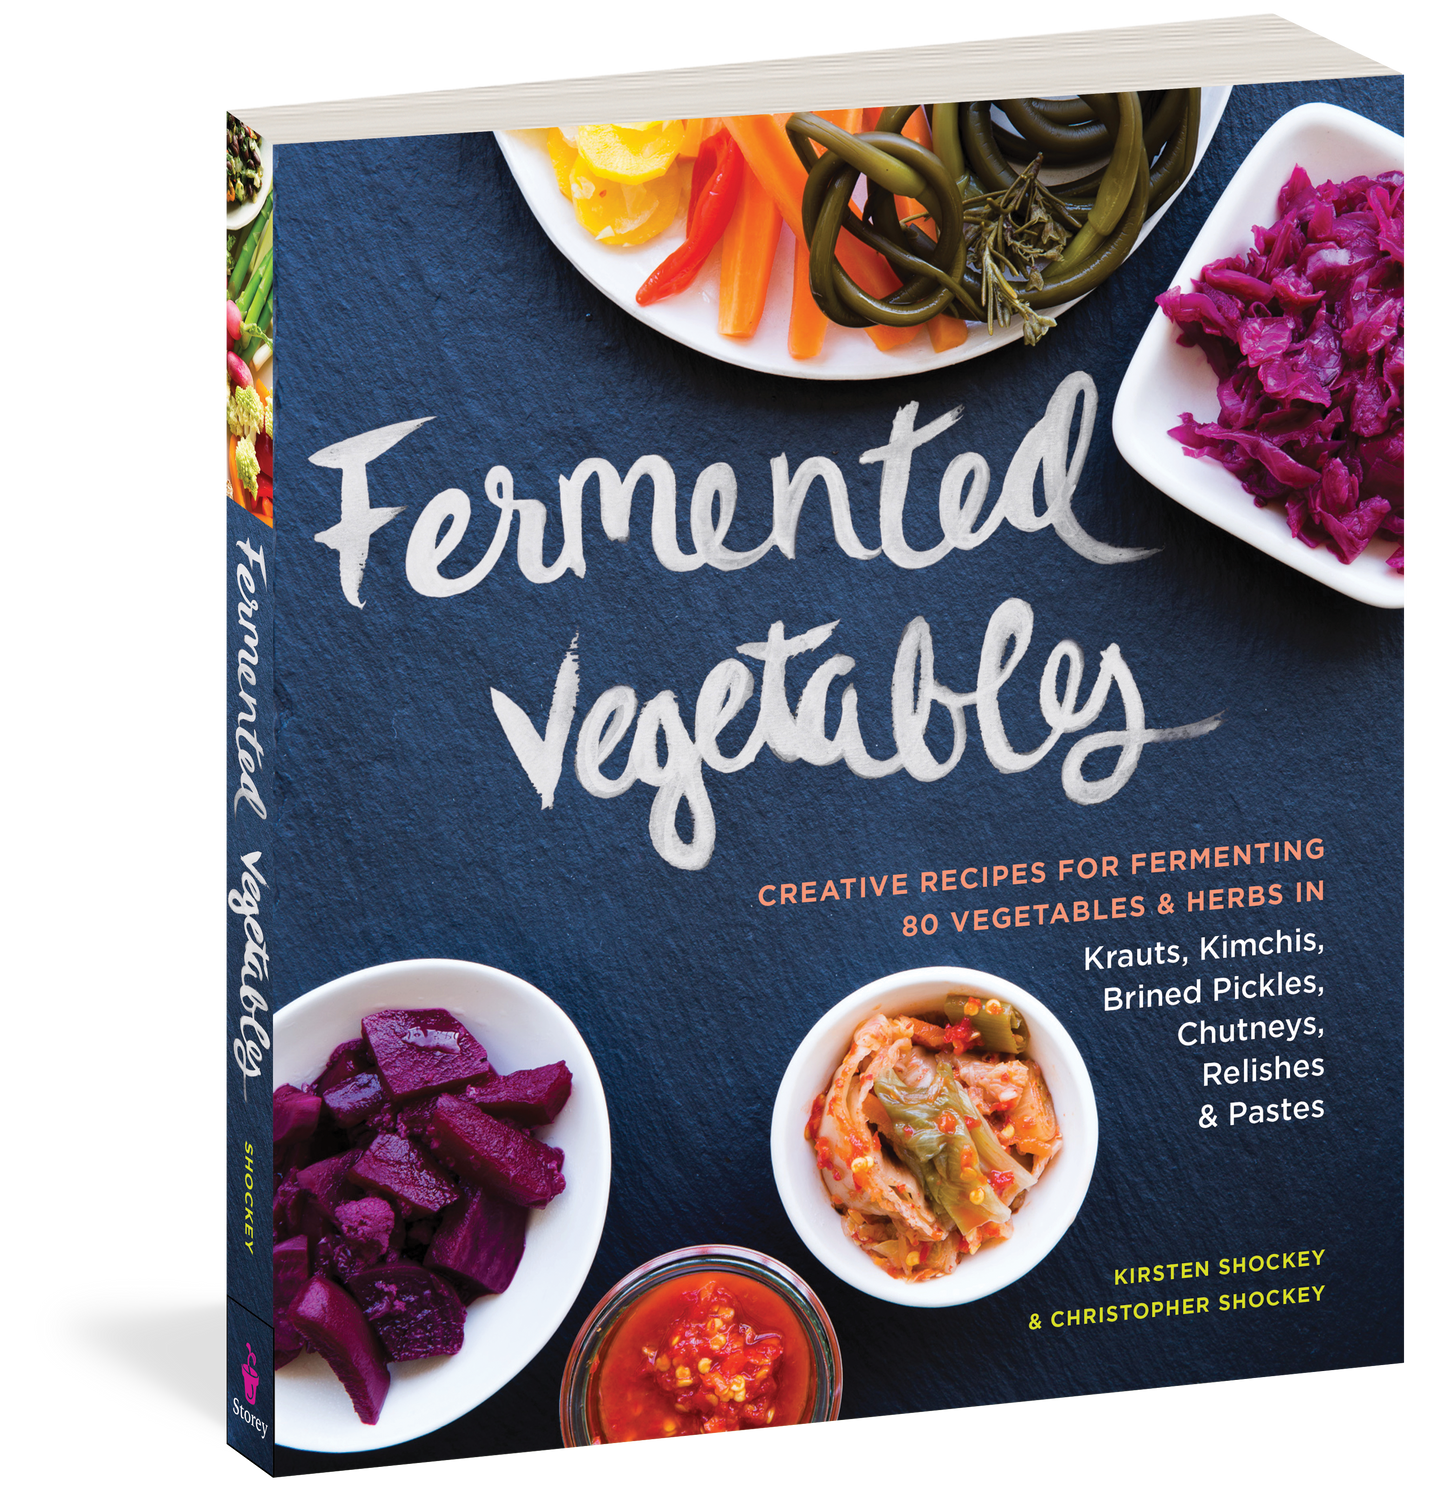 Fermented Vegetables Book By Kirsten K Shockey and Christopher Shockey